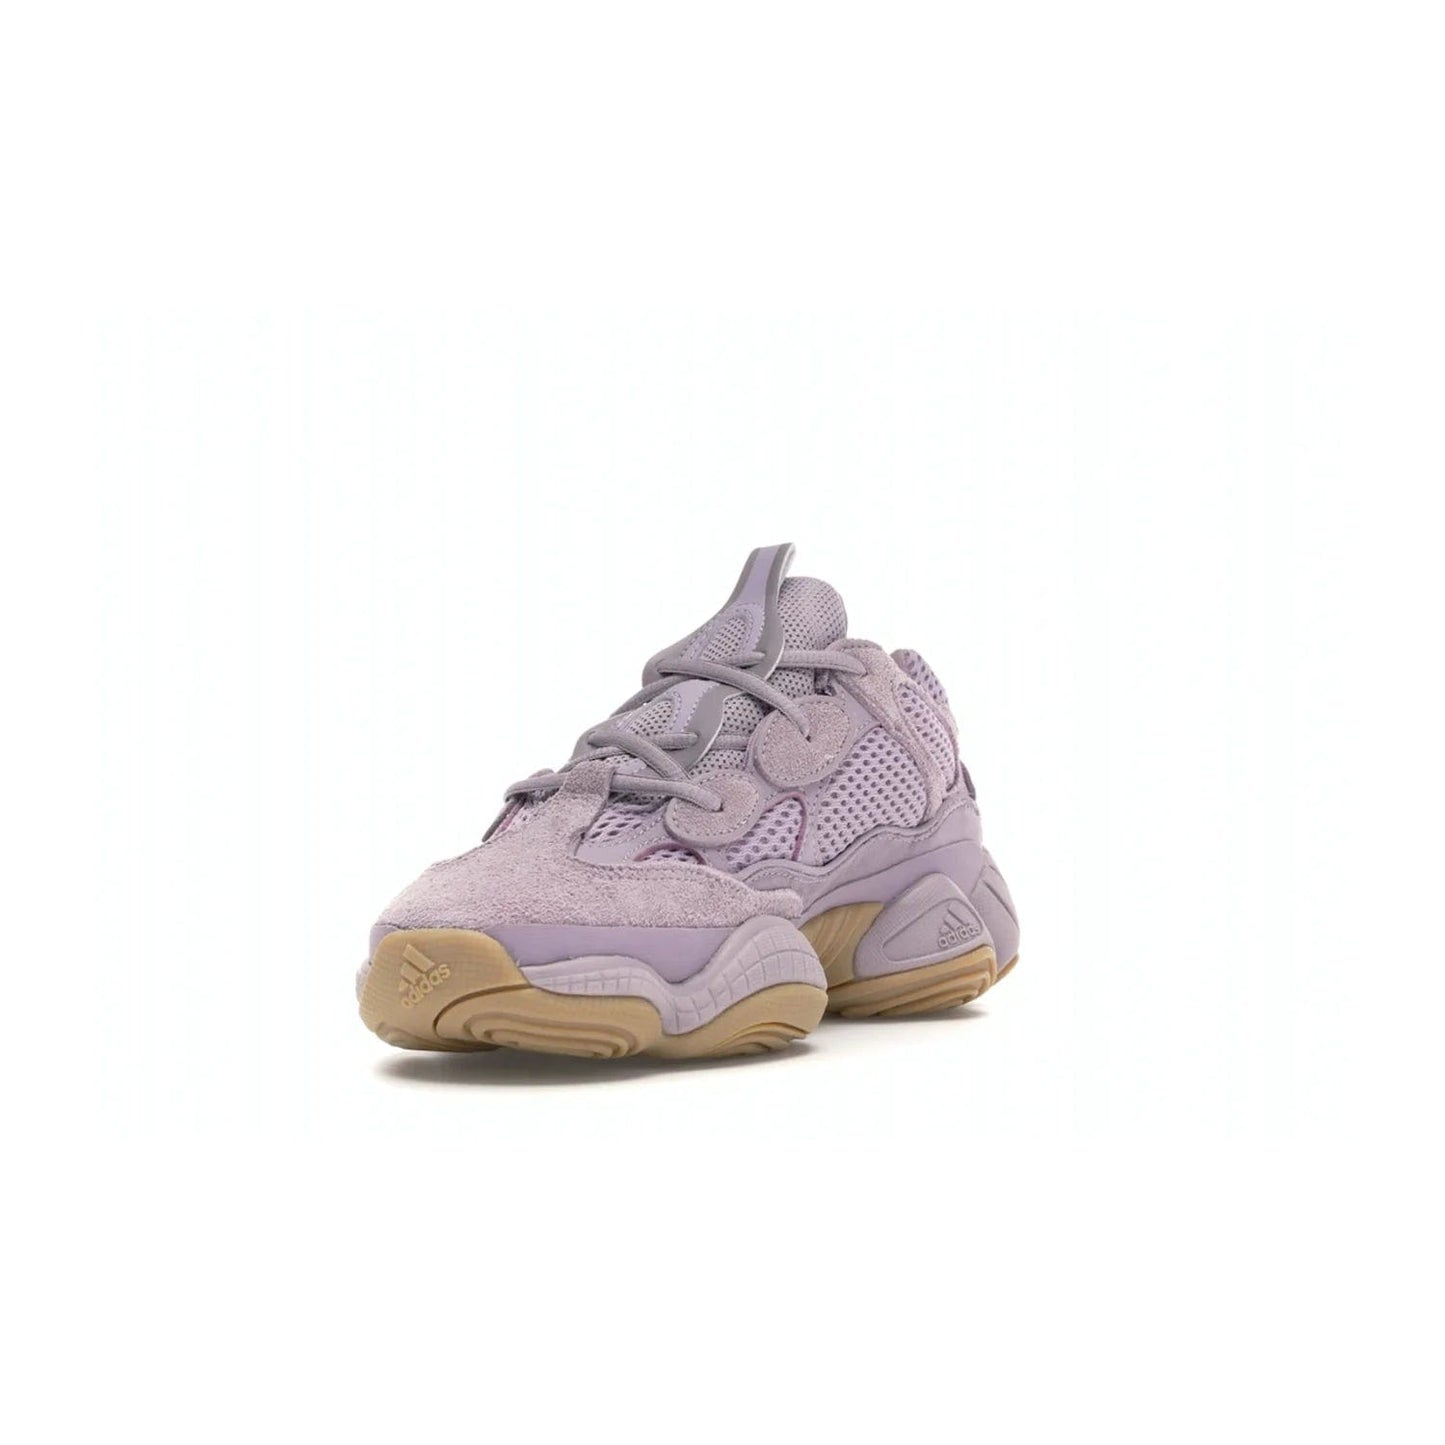 adidas Yeezy 500 Soft Vision - Image 13 - Only at www.BallersClubKickz.com - New adidas Yeezy 500 Soft Vision sneaker featuring a combination of mesh, leather, and suede in a classic Soft Vision colorway. Gum rubber outsole ensures durability and traction. An everyday sneaker that stands out from the crowd.